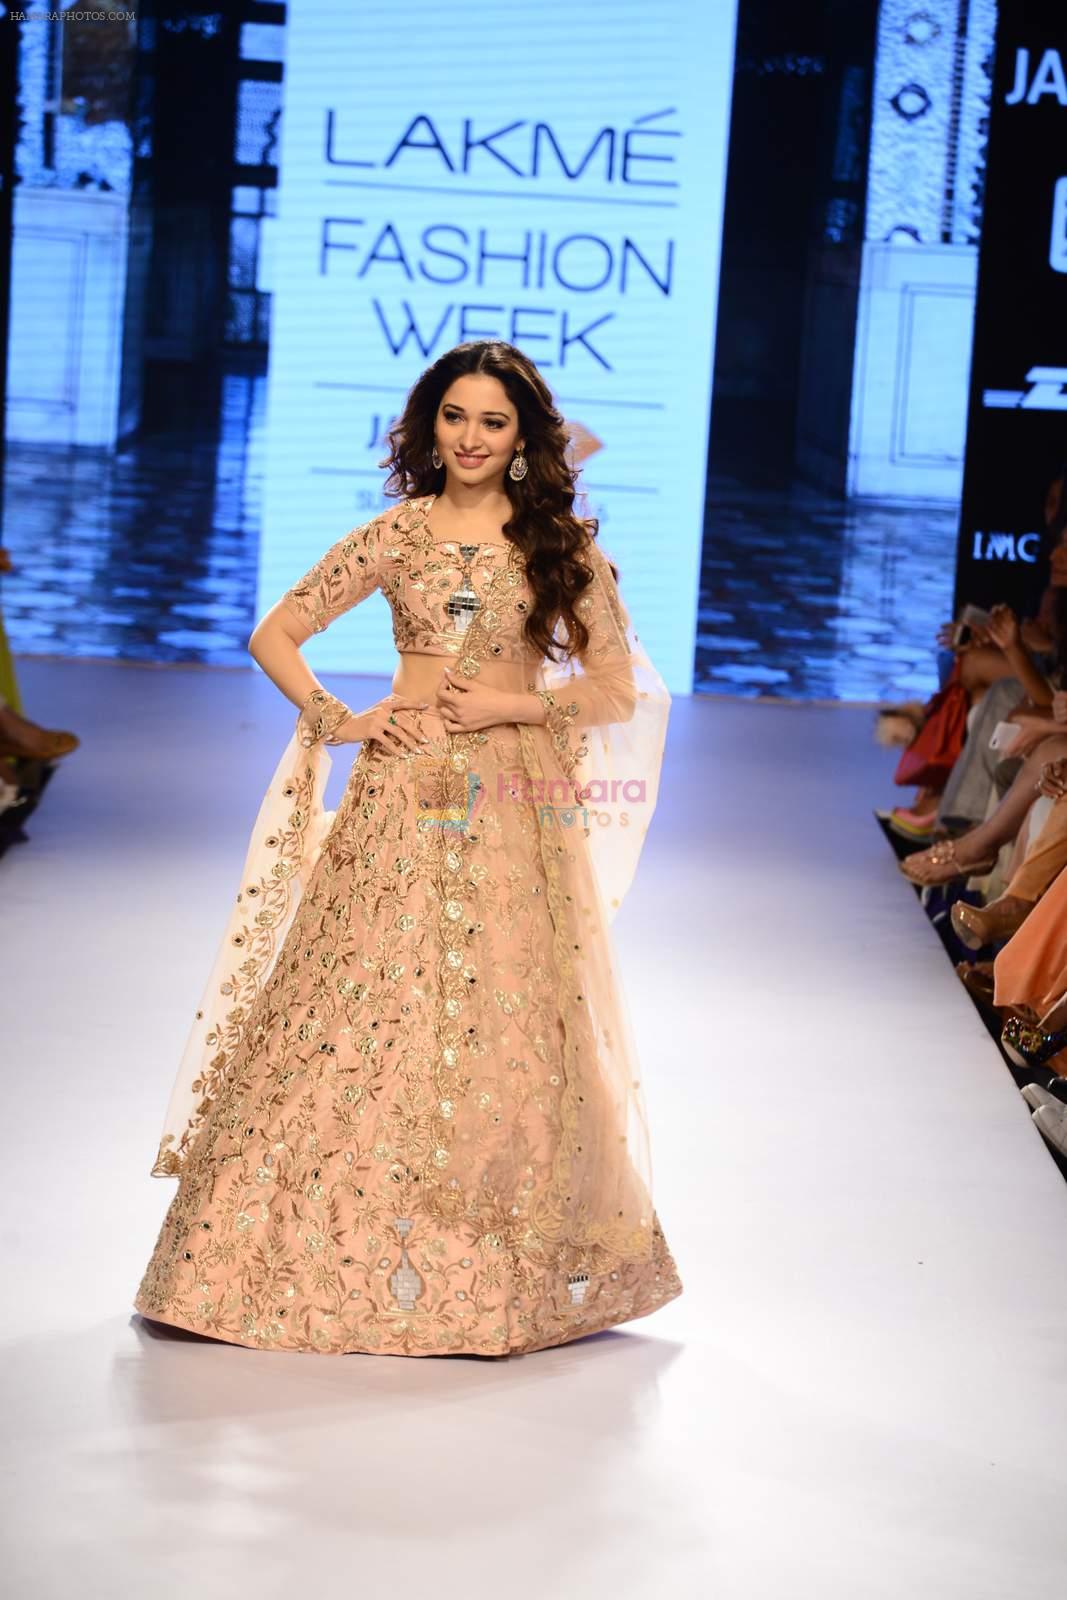 Tamannaah Bhatia walk the ramp for Payal Singhal Show at Lakme Fashion Week 2015 Day 4 on 21st March 2015